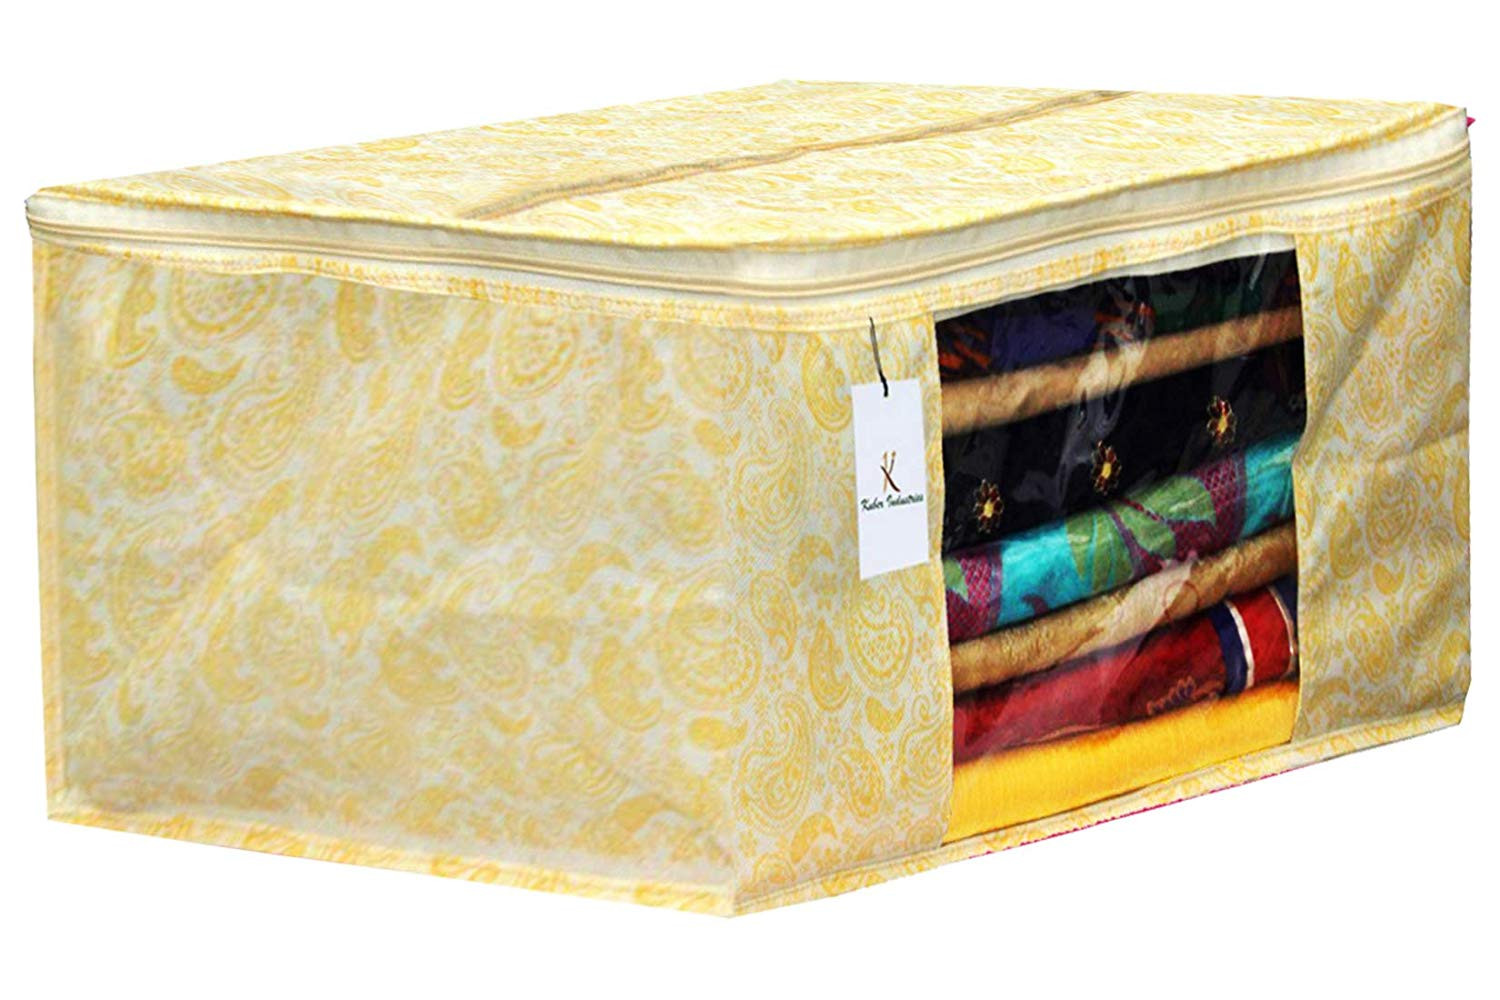 Kuber Industries Metalic Printed Non Woven Saree Cover And Underbed Storage Bag, Storage Organiser, Blanket Cover, Gold & Beige -CTKTC42387